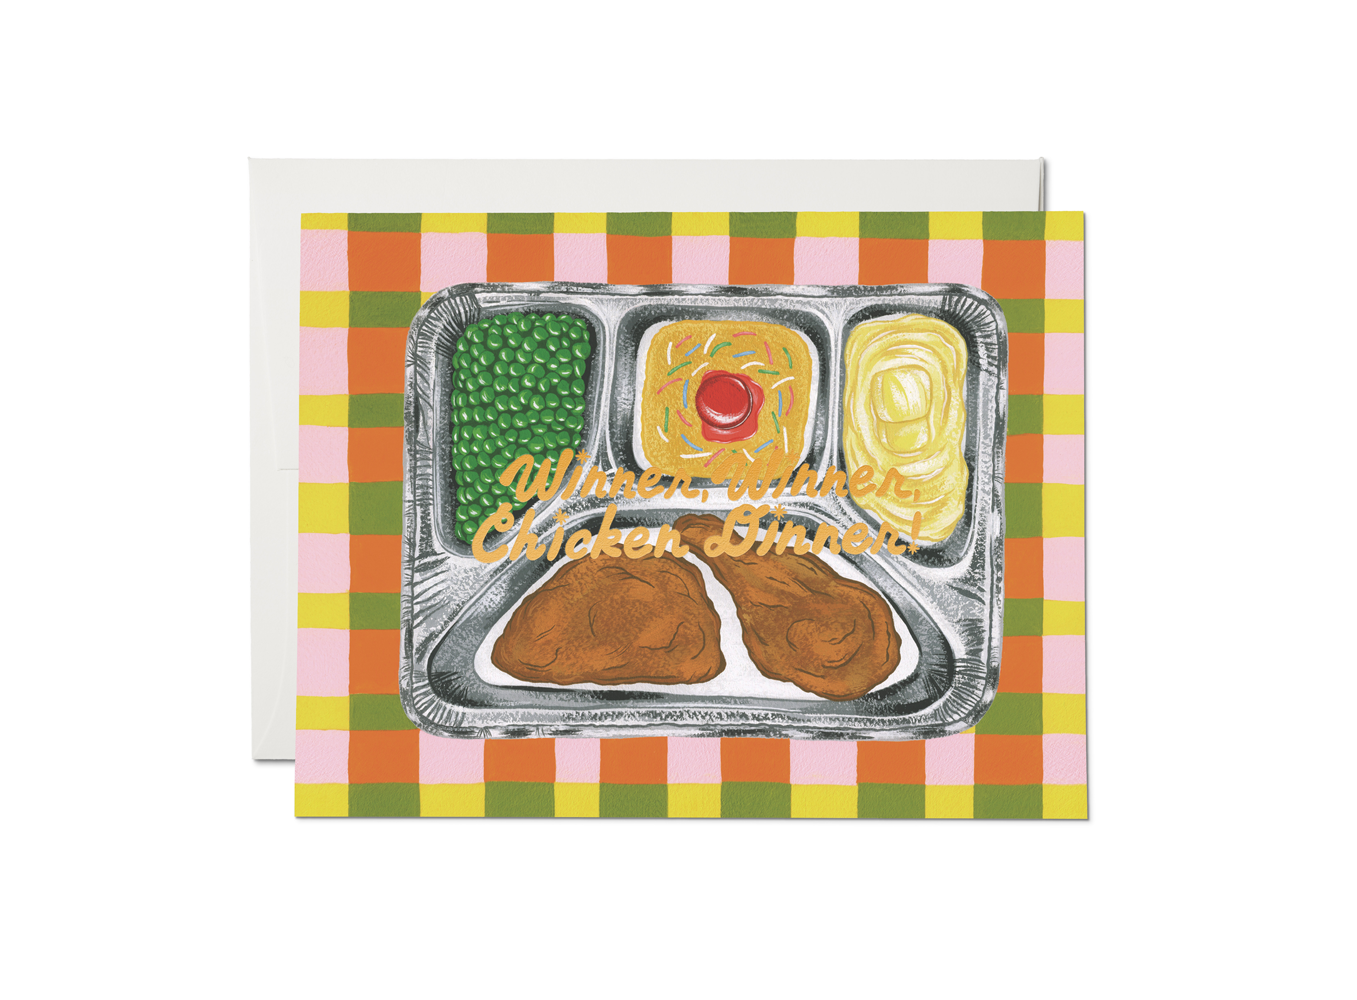 Greeting card that reads "Winner, Winner, Chicken Dinner!" over a foil tray of chicken, peas, mashed potatoes and dessert  